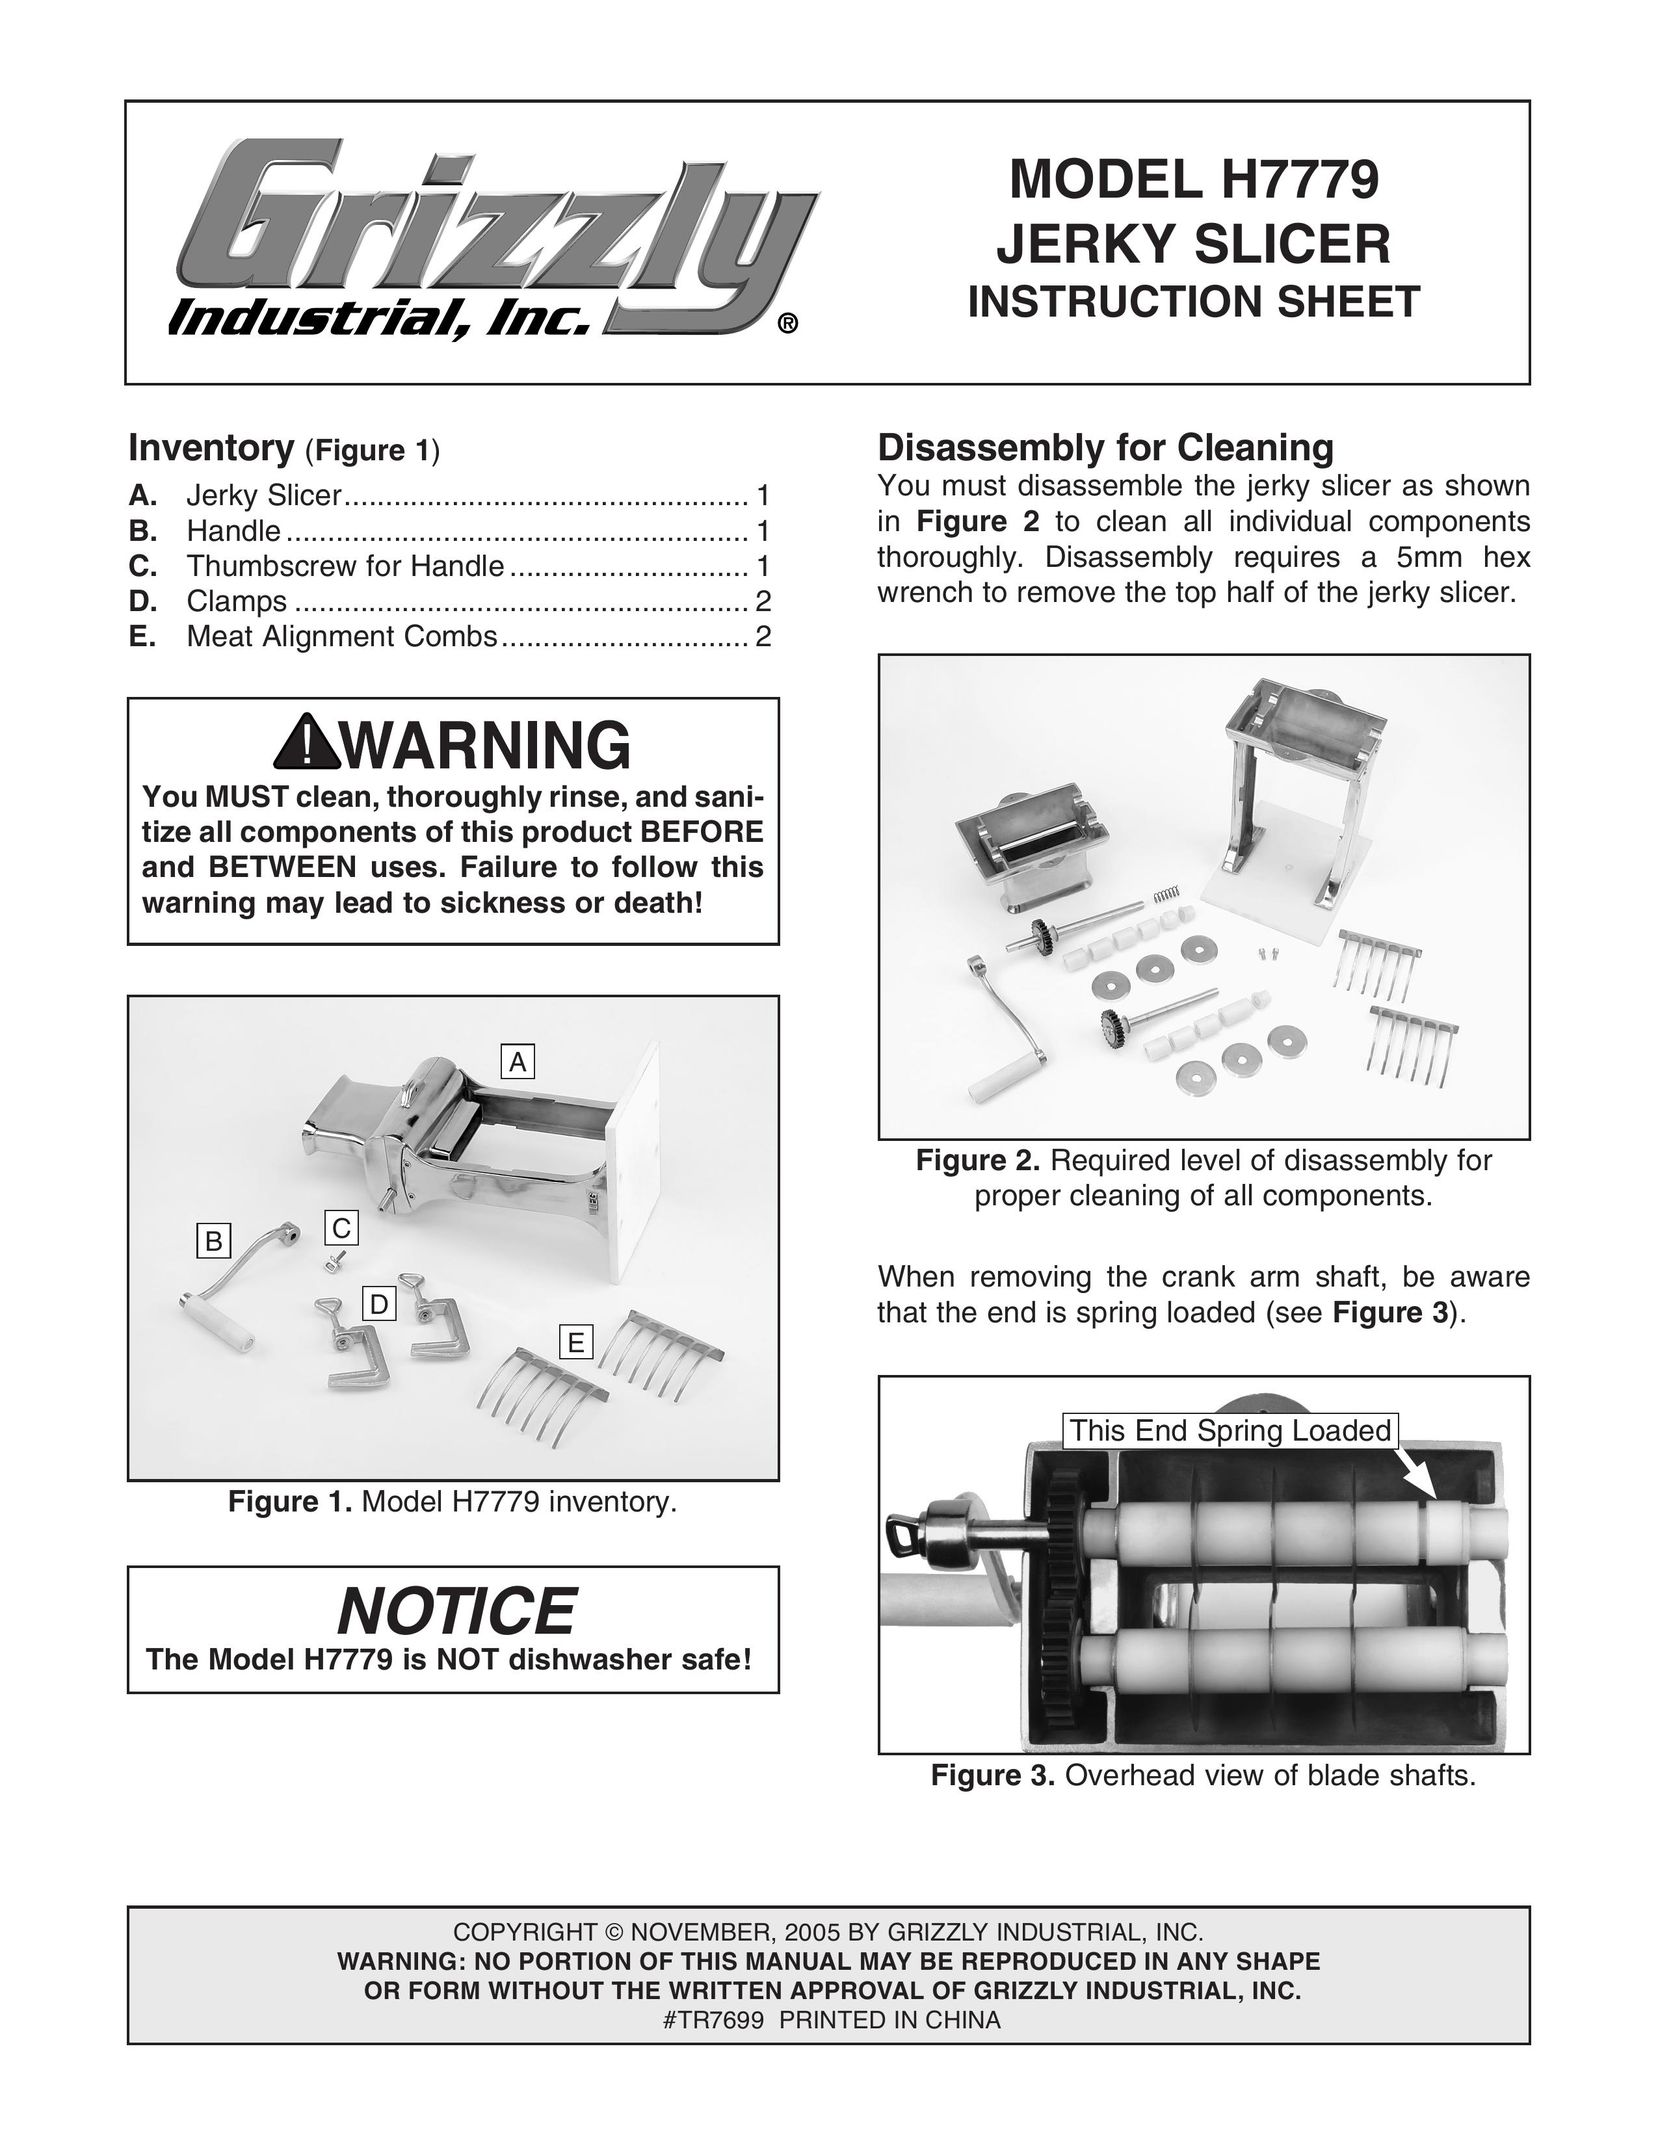 Grizzly H7779 Kitchen Utensil User Manual